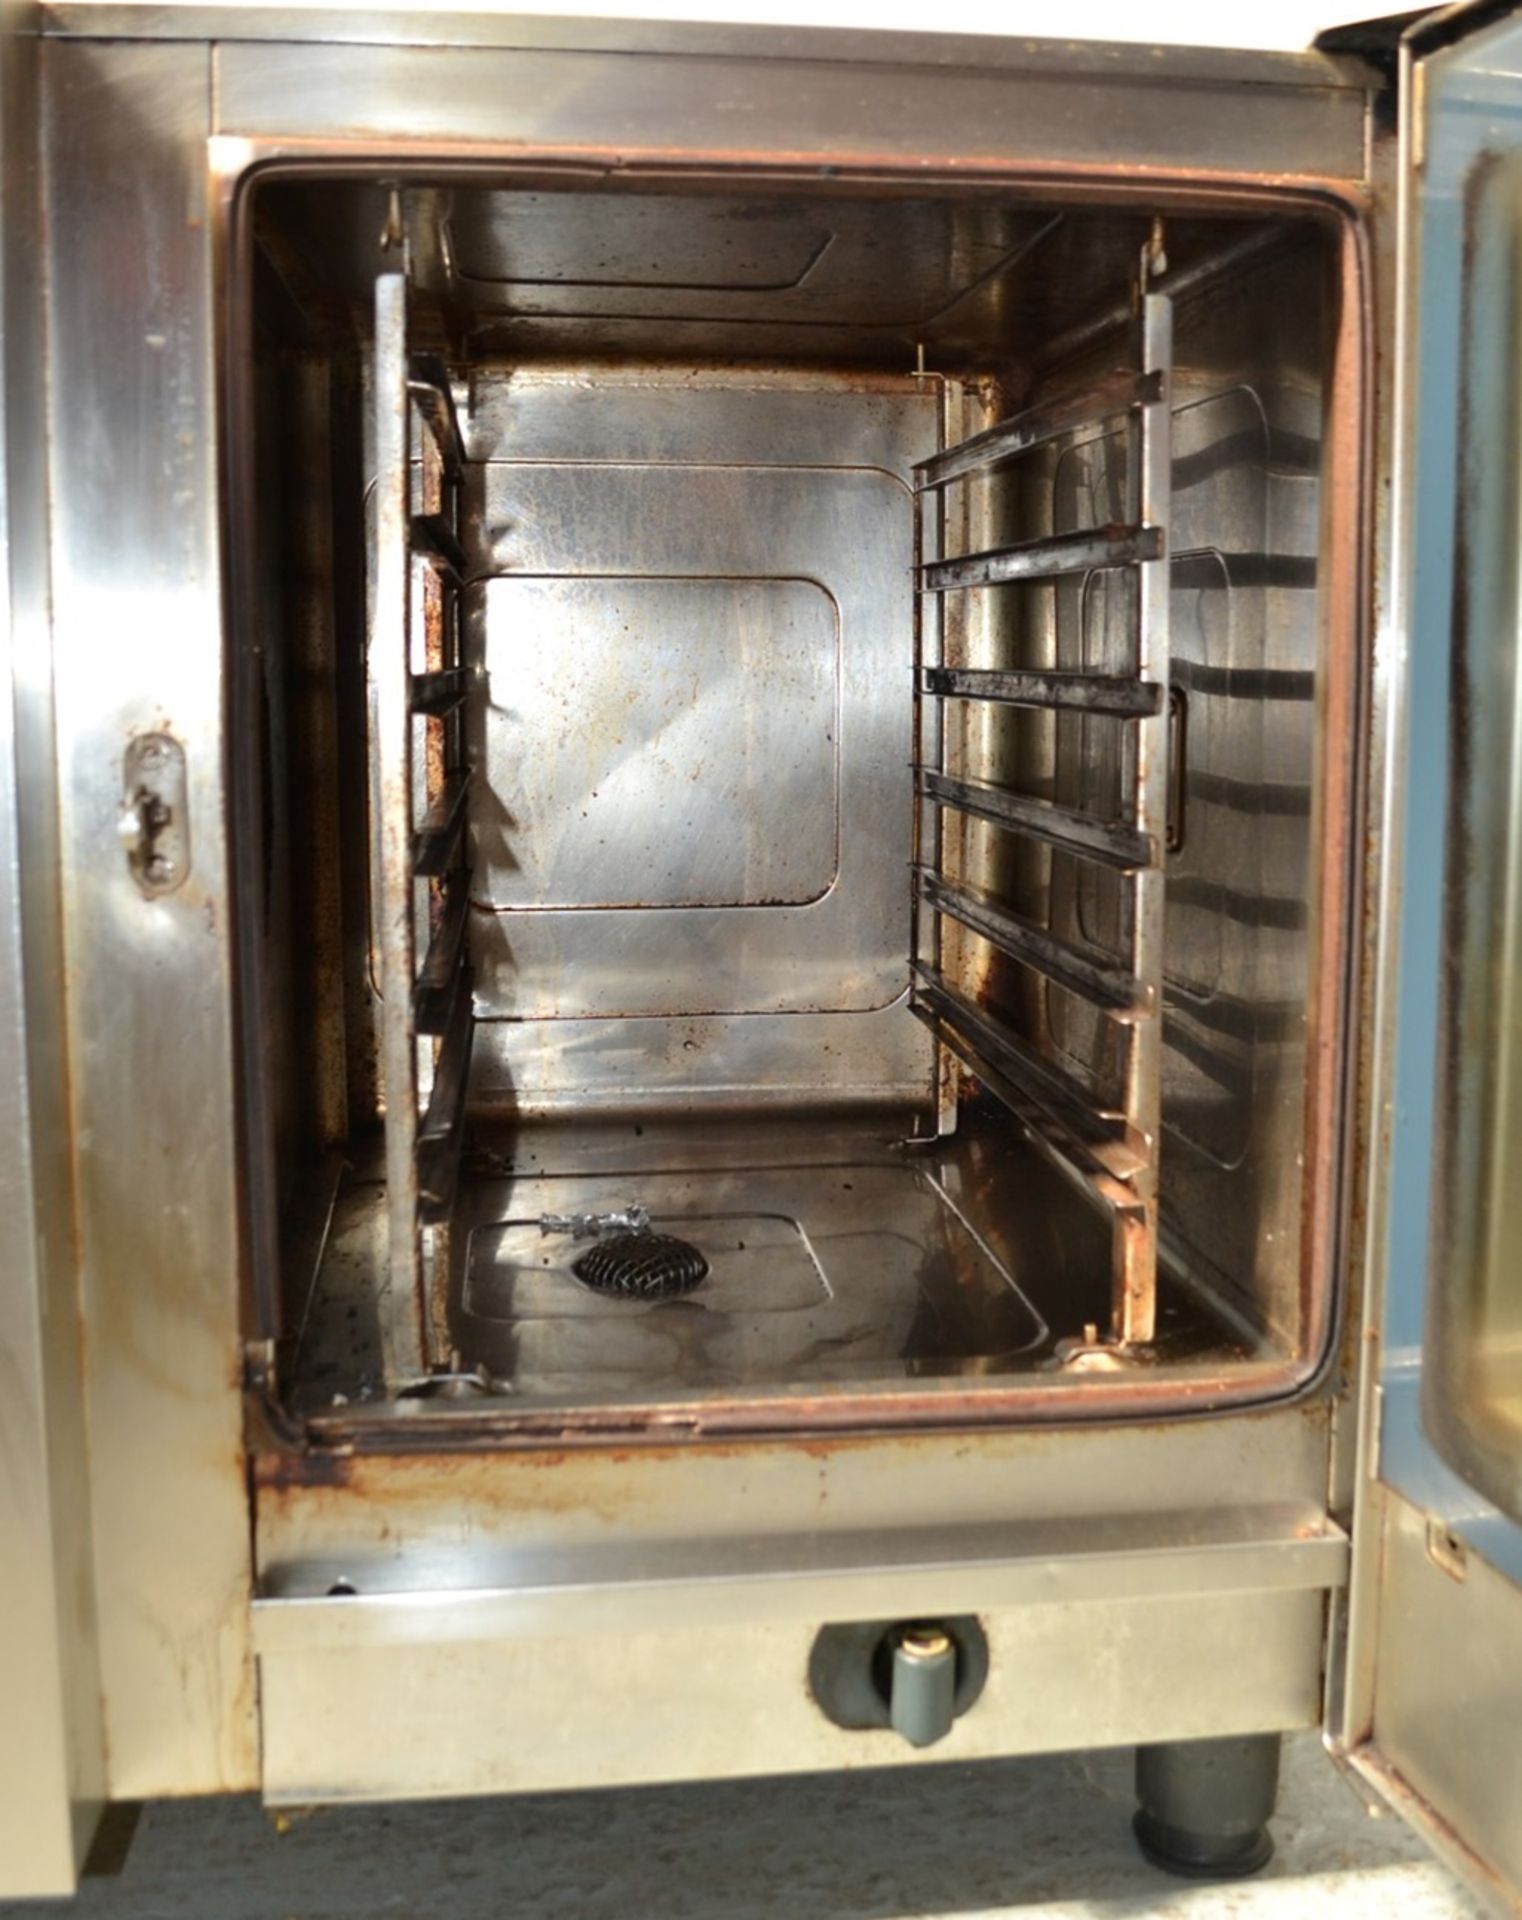 1 x Henny Penny Multifunction Commercial Combi Oven - Model: MCS6 - Commercial Catering Equipment In - Image 3 of 9